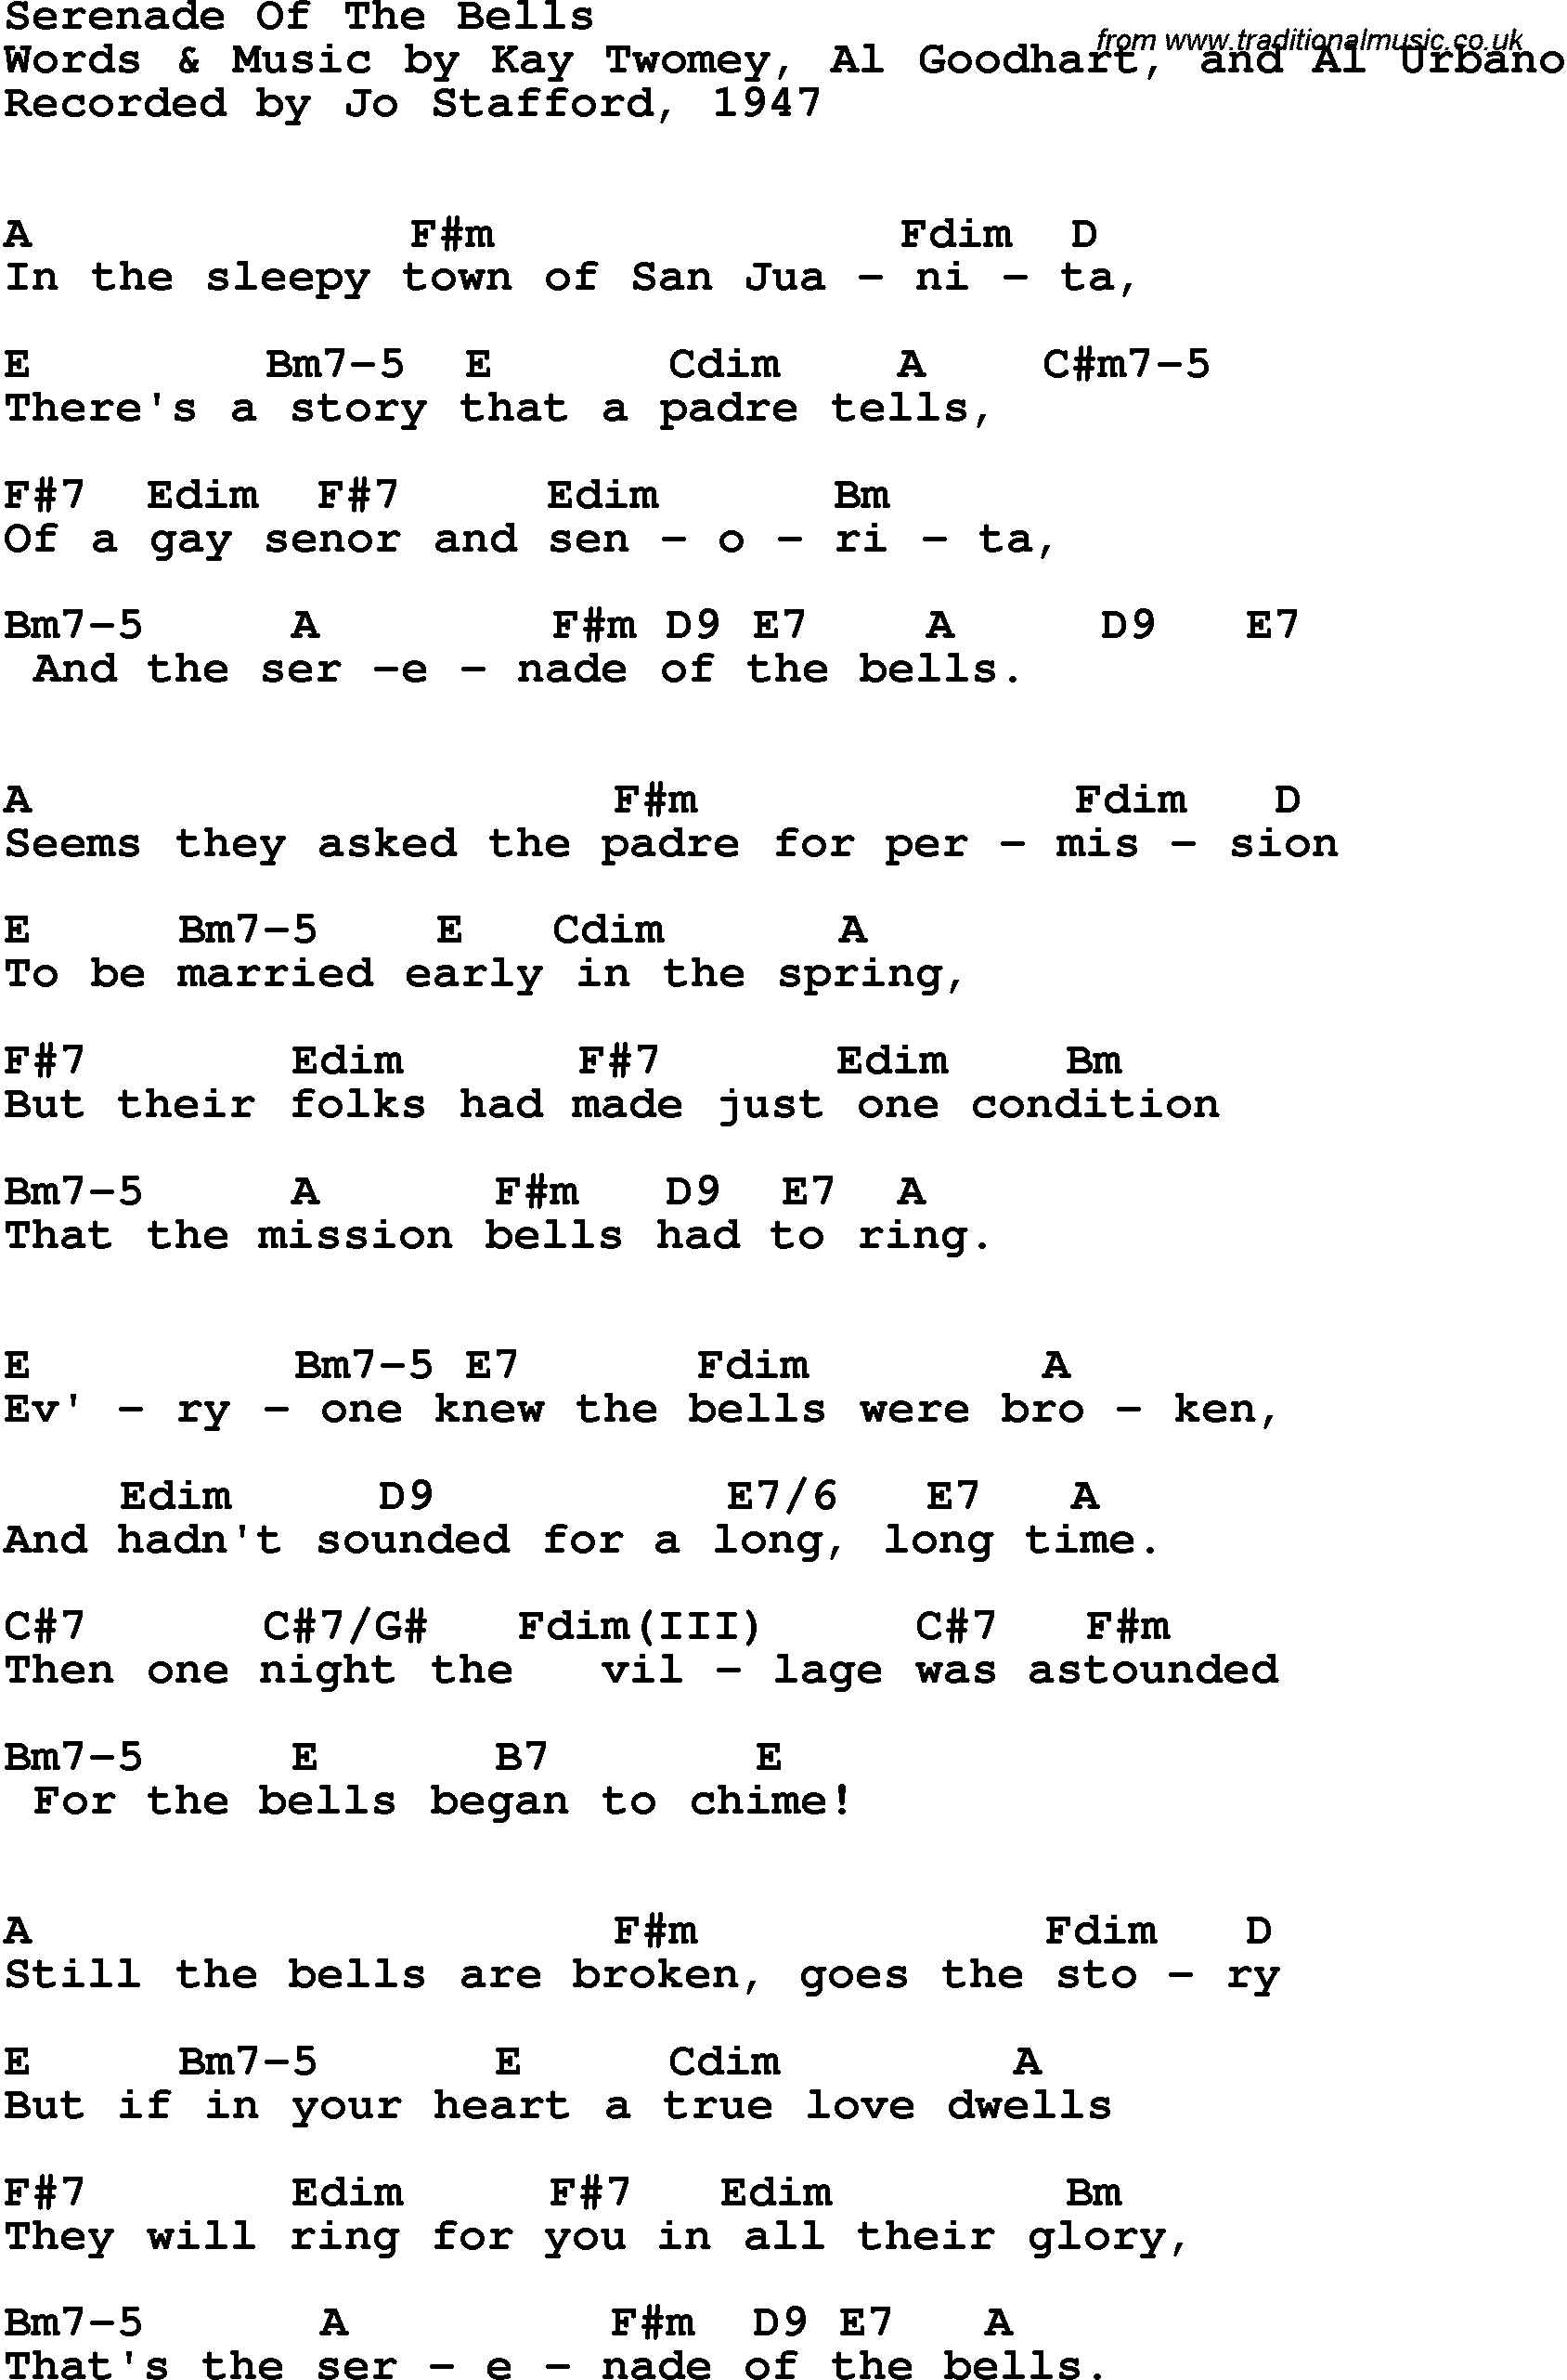 Song Lyrics with guitar chords for Serenade Of The Bells - Jo Stafford, 1947